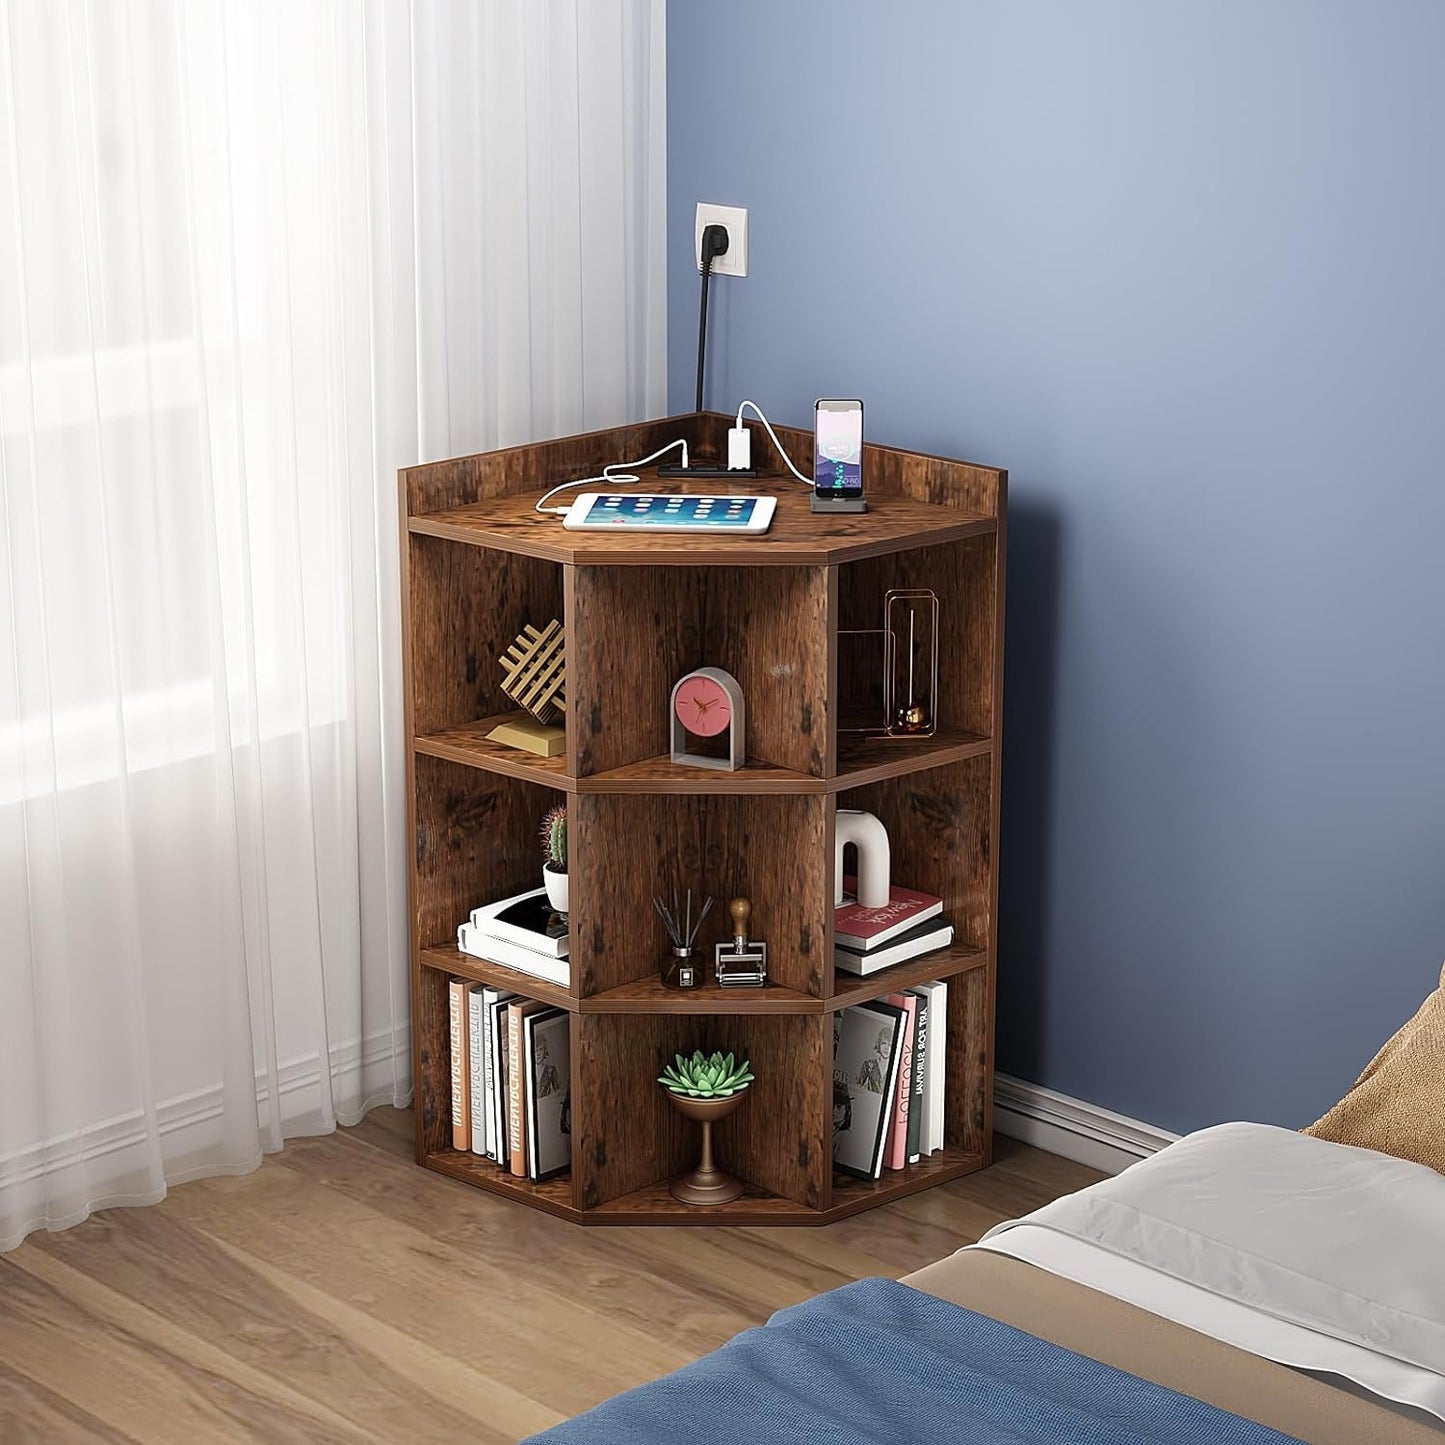 3-Tier Corner Cabinet with USB Ports and Outlet,Corner Storage Cabinet with 9 Cubes